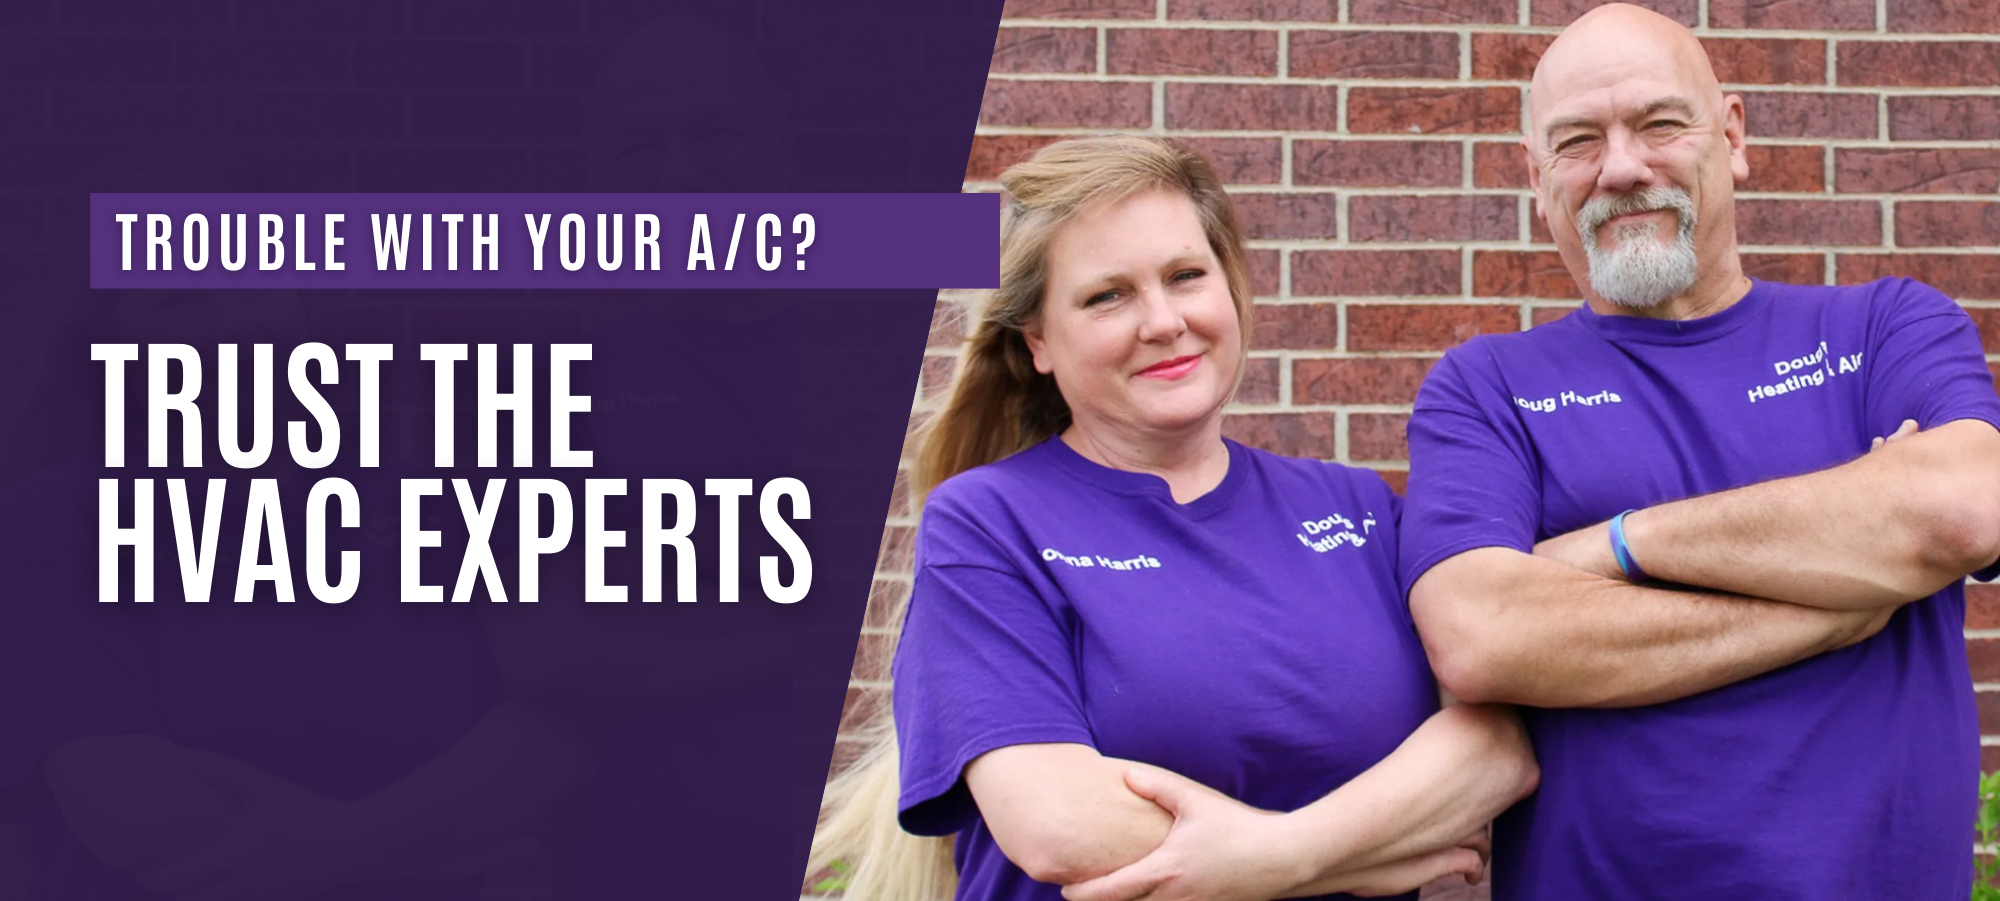 Owners of Doug's Heating and Air - Trusted HVAC experts 